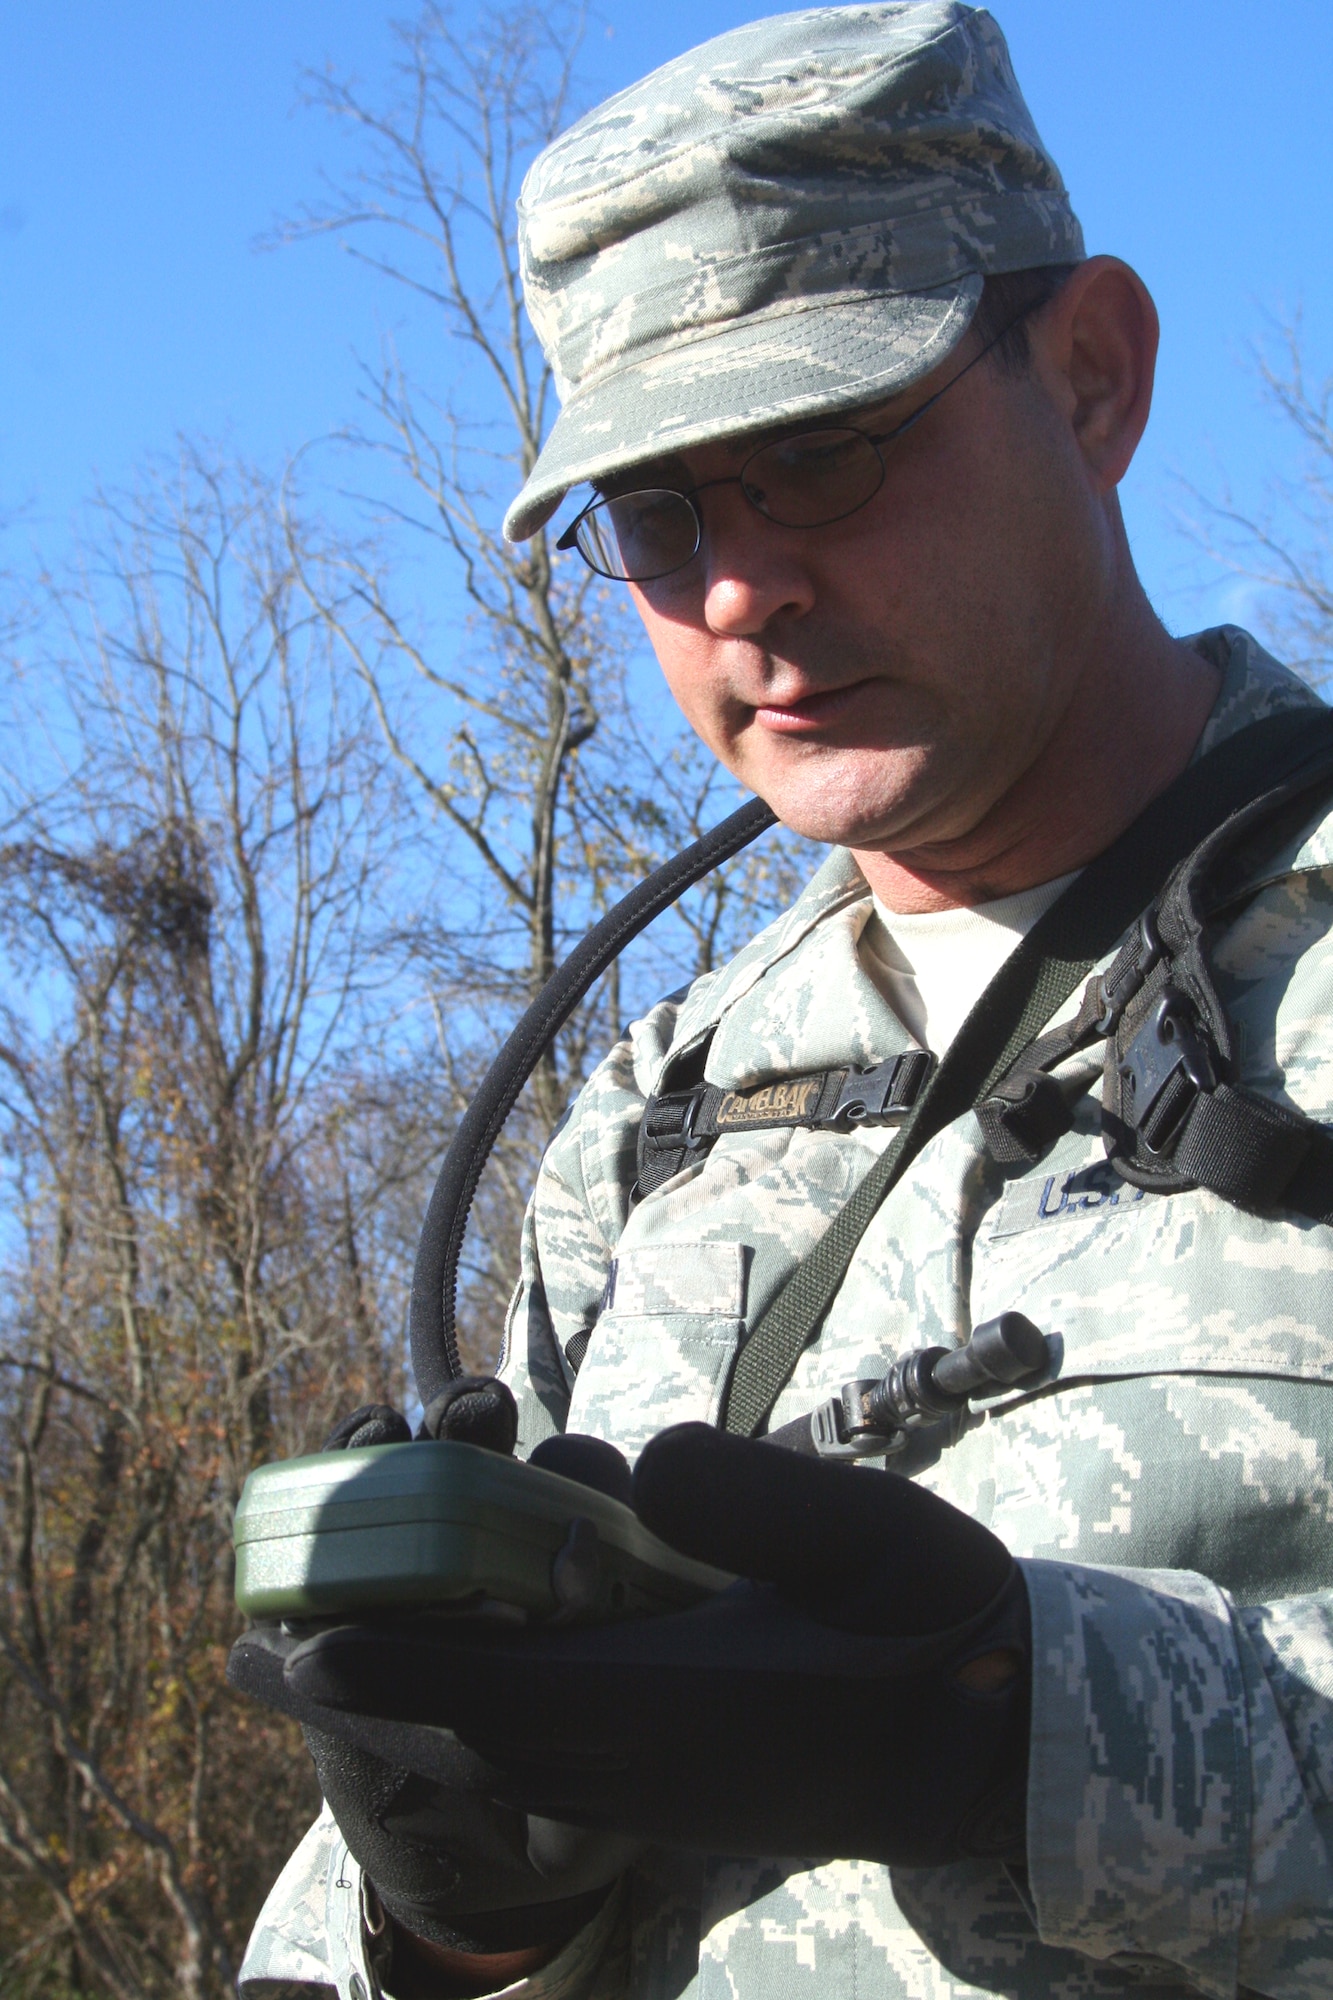 A students in the Combat Airman Skills Training Course 10-1A, taught by the U.S. Air Force Expeditionary Center's 421st Combat Training Squadron, prepares a Global Positioning System device for a day of land navigation training in the course on a range at Joint Base McGuire-Dix-Lakehurst, N.J., on Nov. 6, 2009.  The course prepares Airmen for upcoming deployments.  (U.S. Air Force Photo/Tech. Sgt. Scott T. Sturkol)